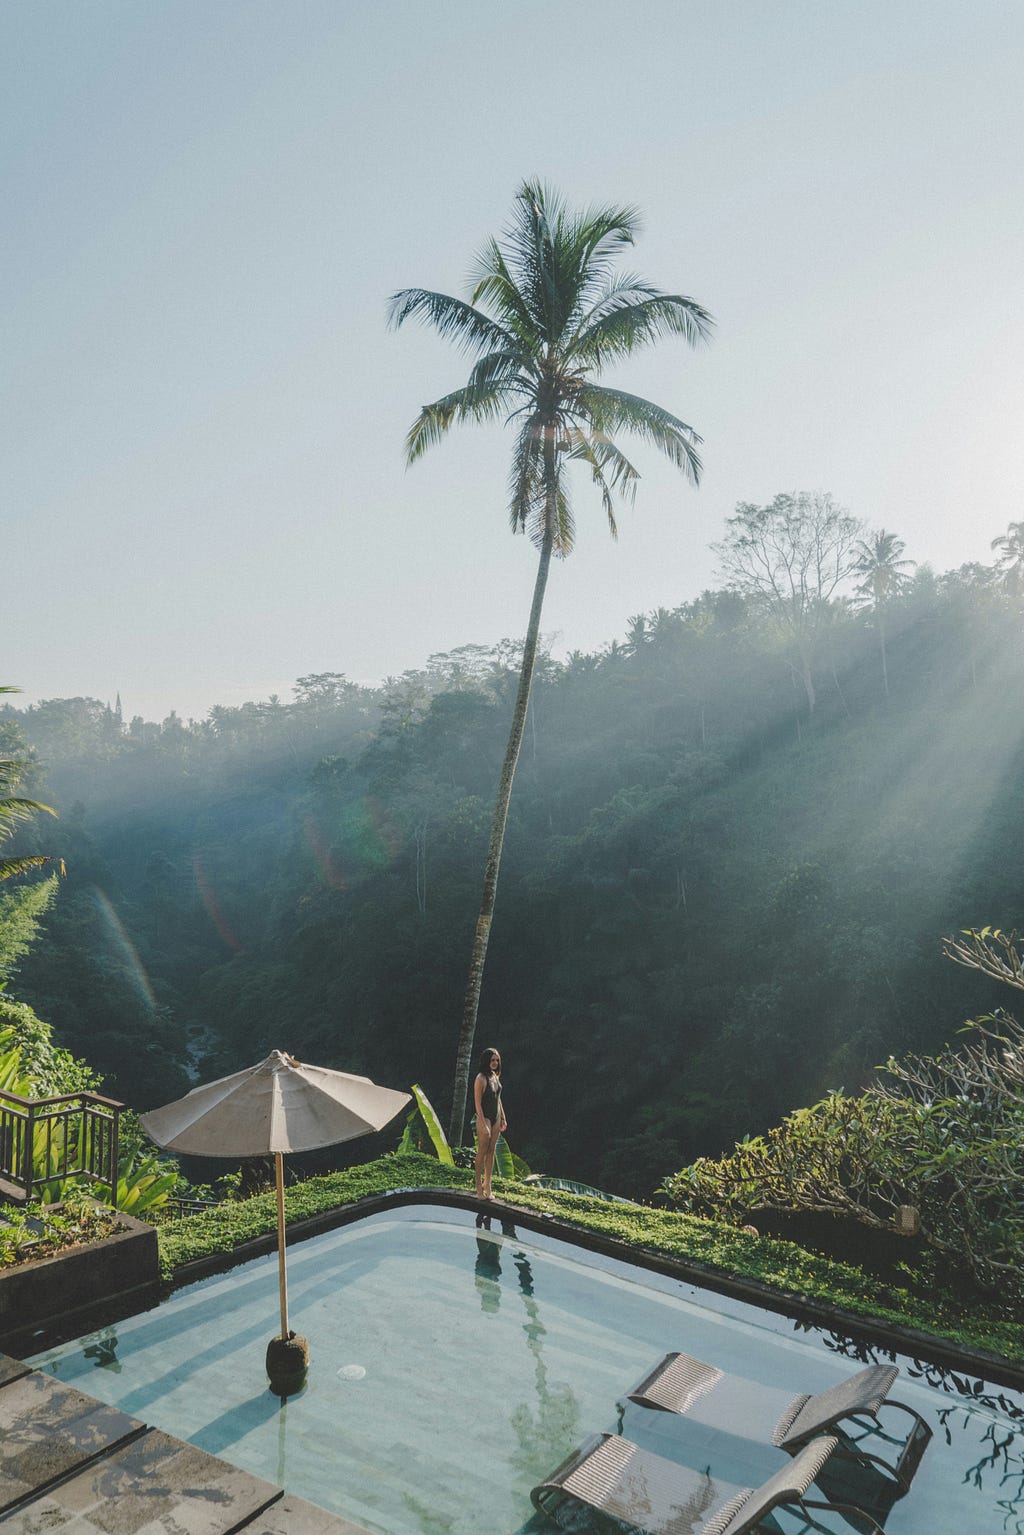 Bali is home to a plethora of luxurious accommodations, perfect for couples, families, and groups of friends. Consider staying in a private villa, boutique hotel, or high-end resort to elevate your travel experience. Popular areas for luxury stays include Seminyak, Ubud, and Nusa Dua.